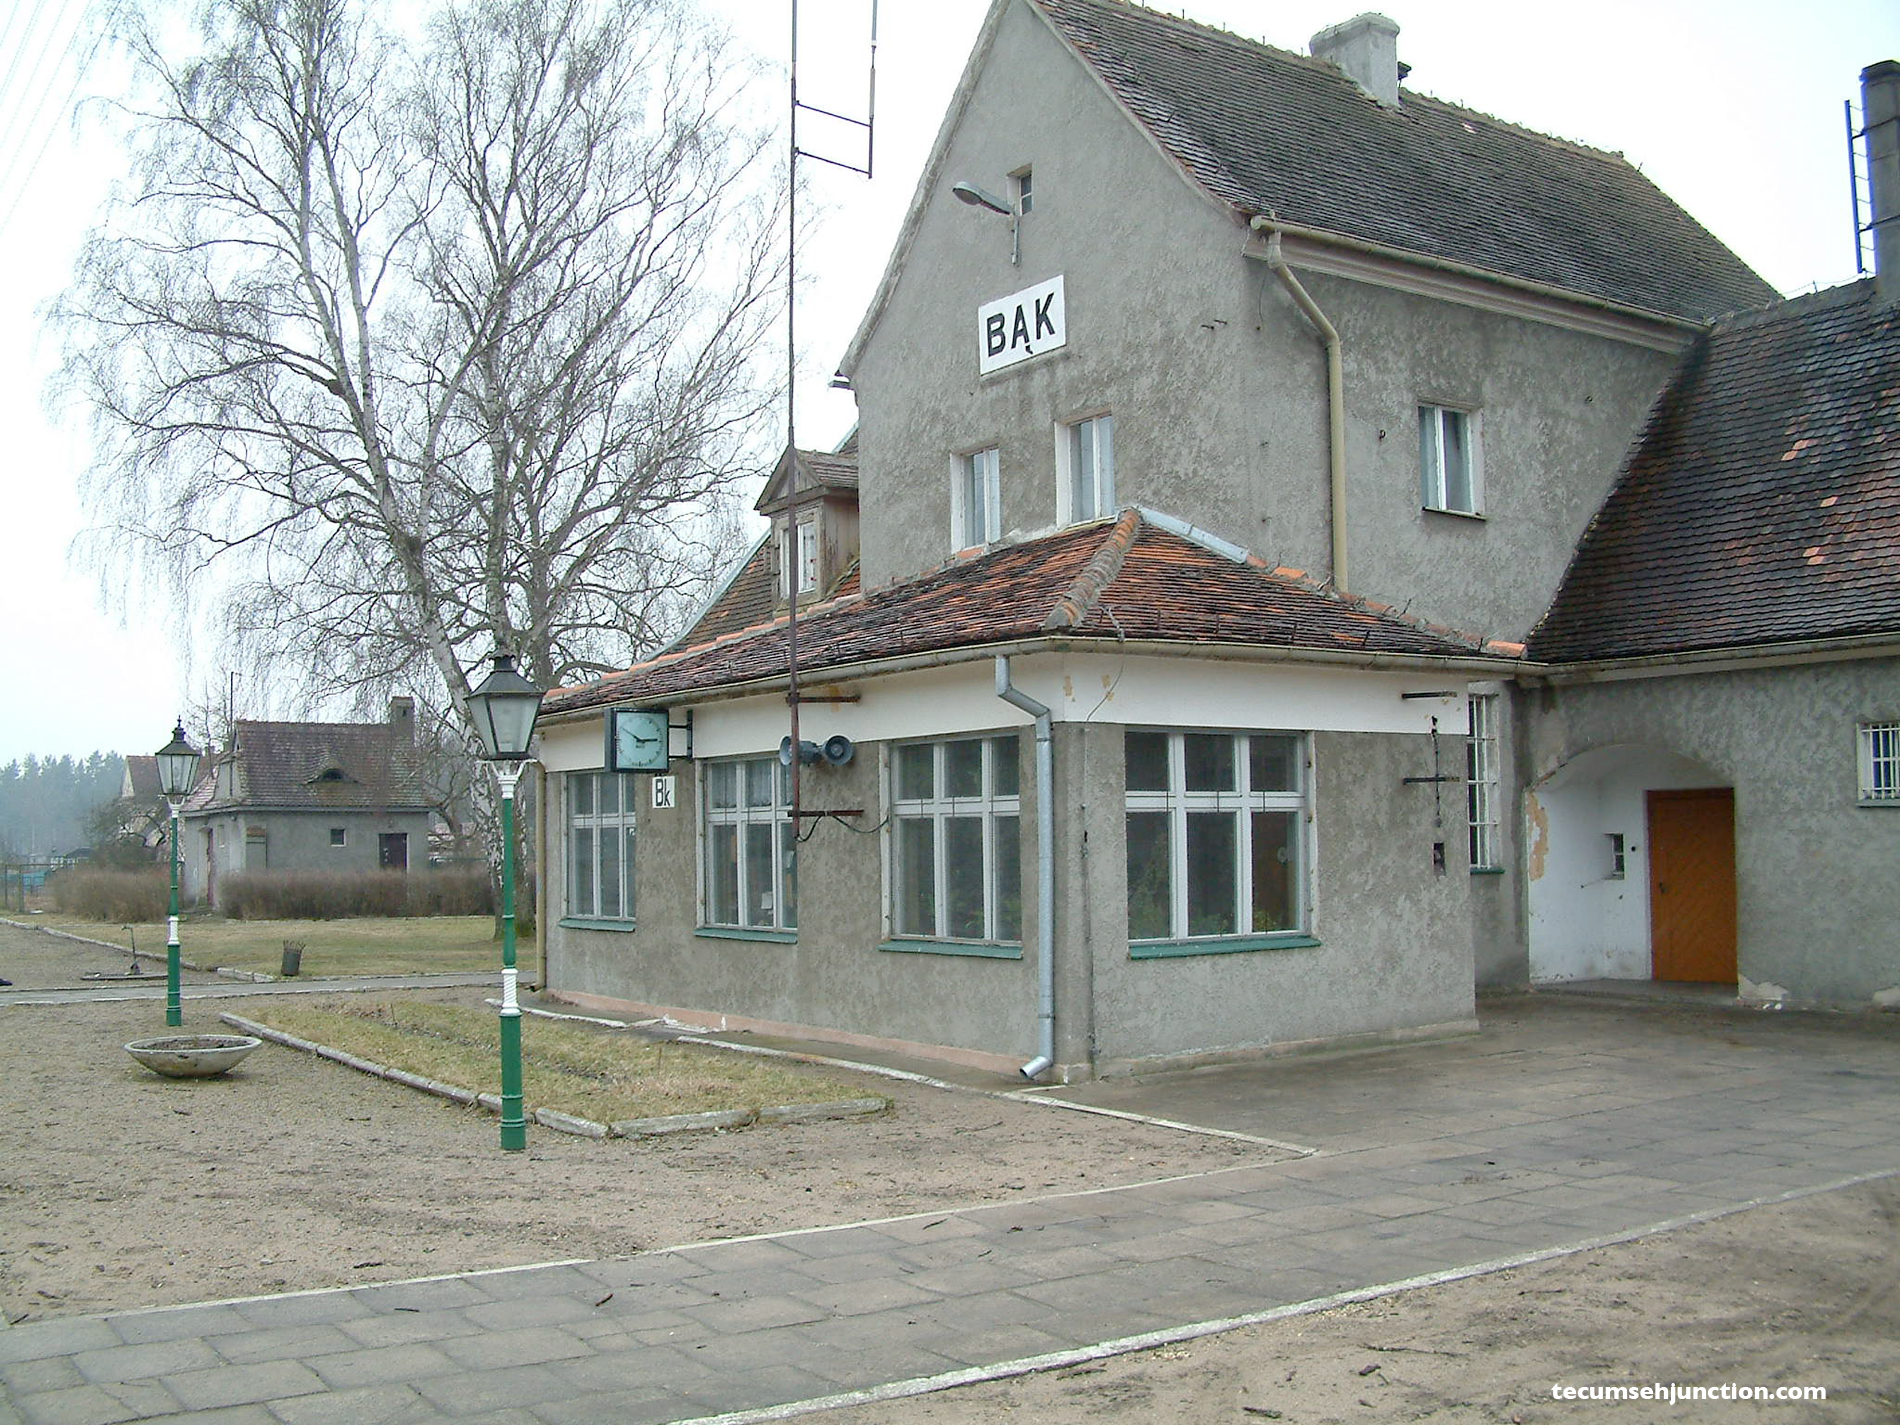 Bąk station with the signal box in front and the WC building in the distance